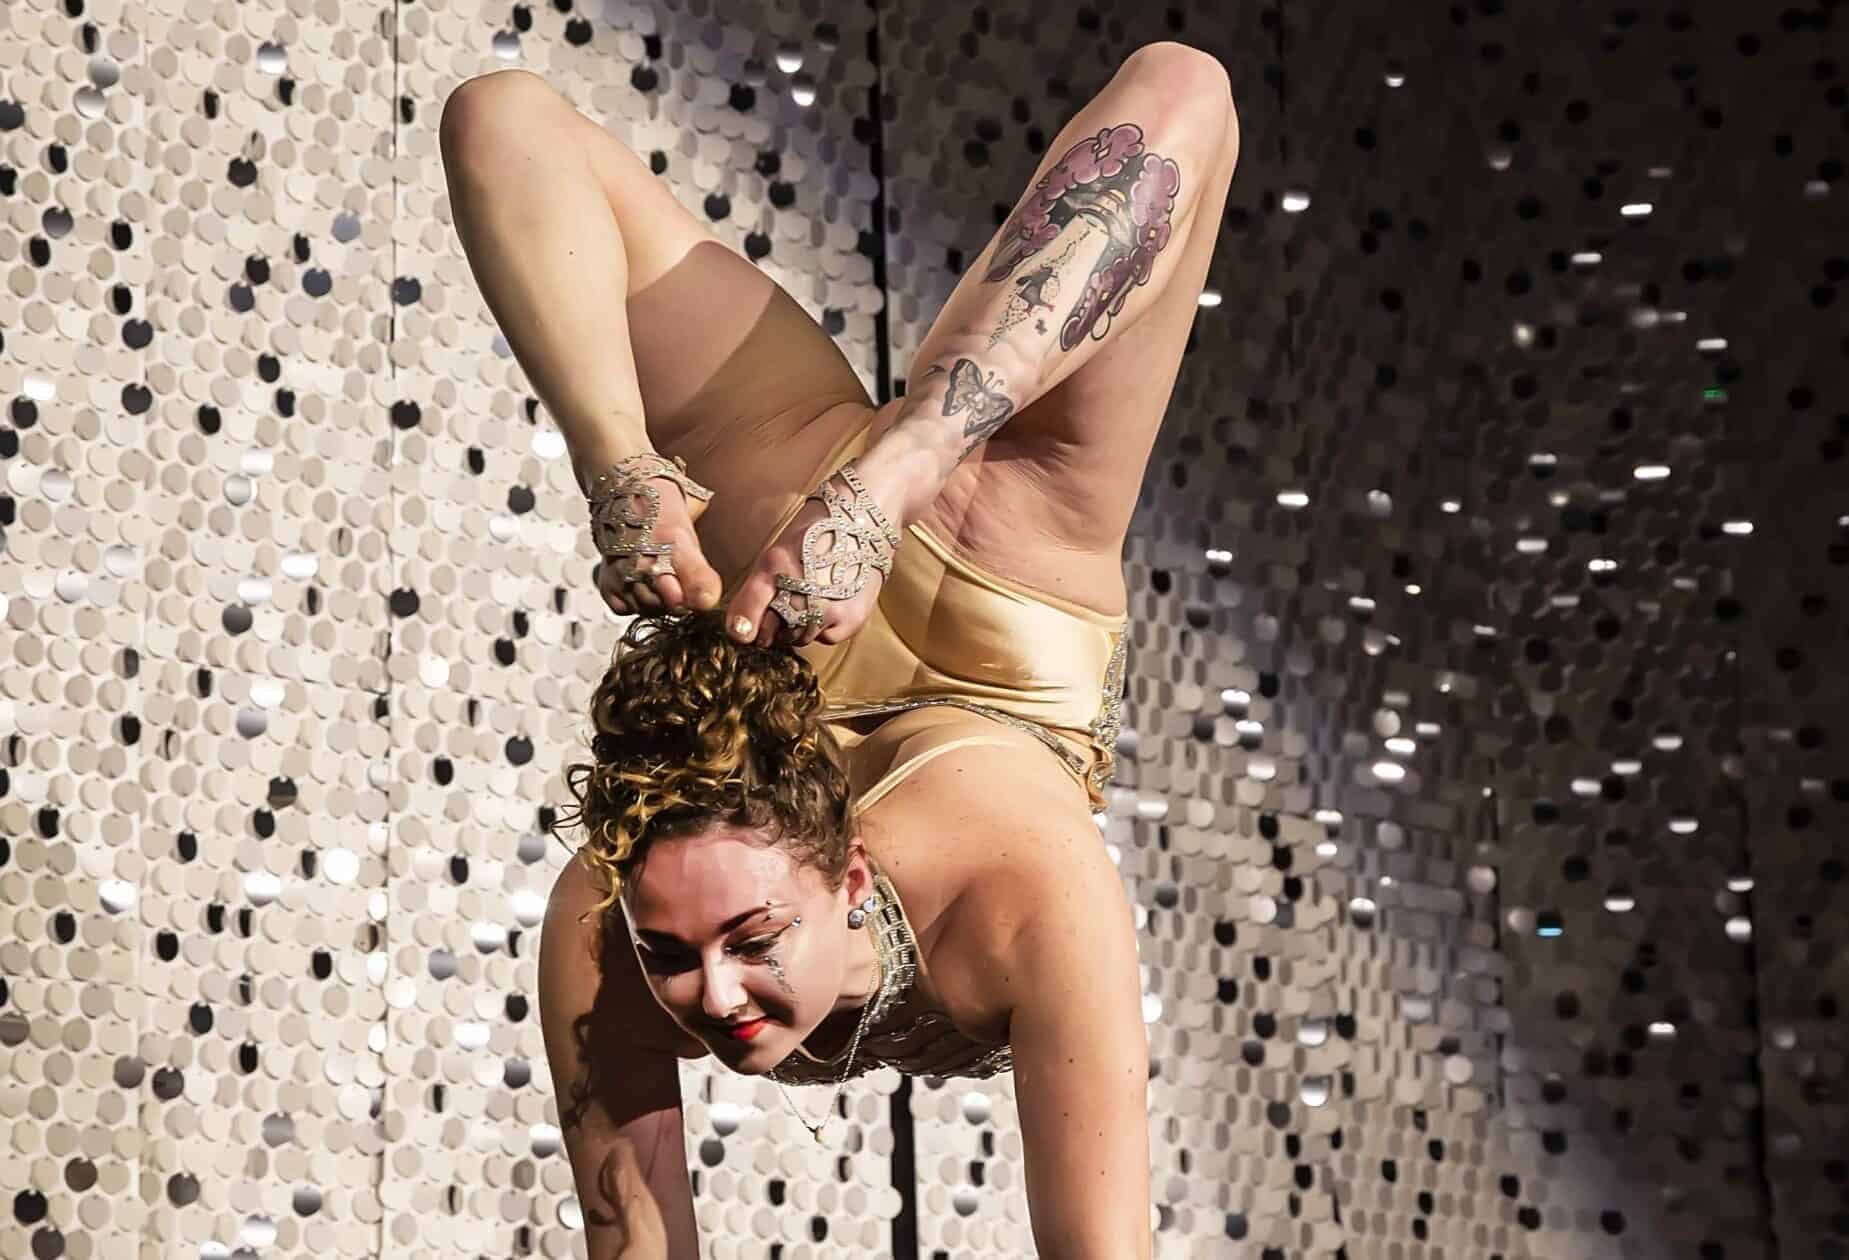 A lady standing upside down for a circus performance